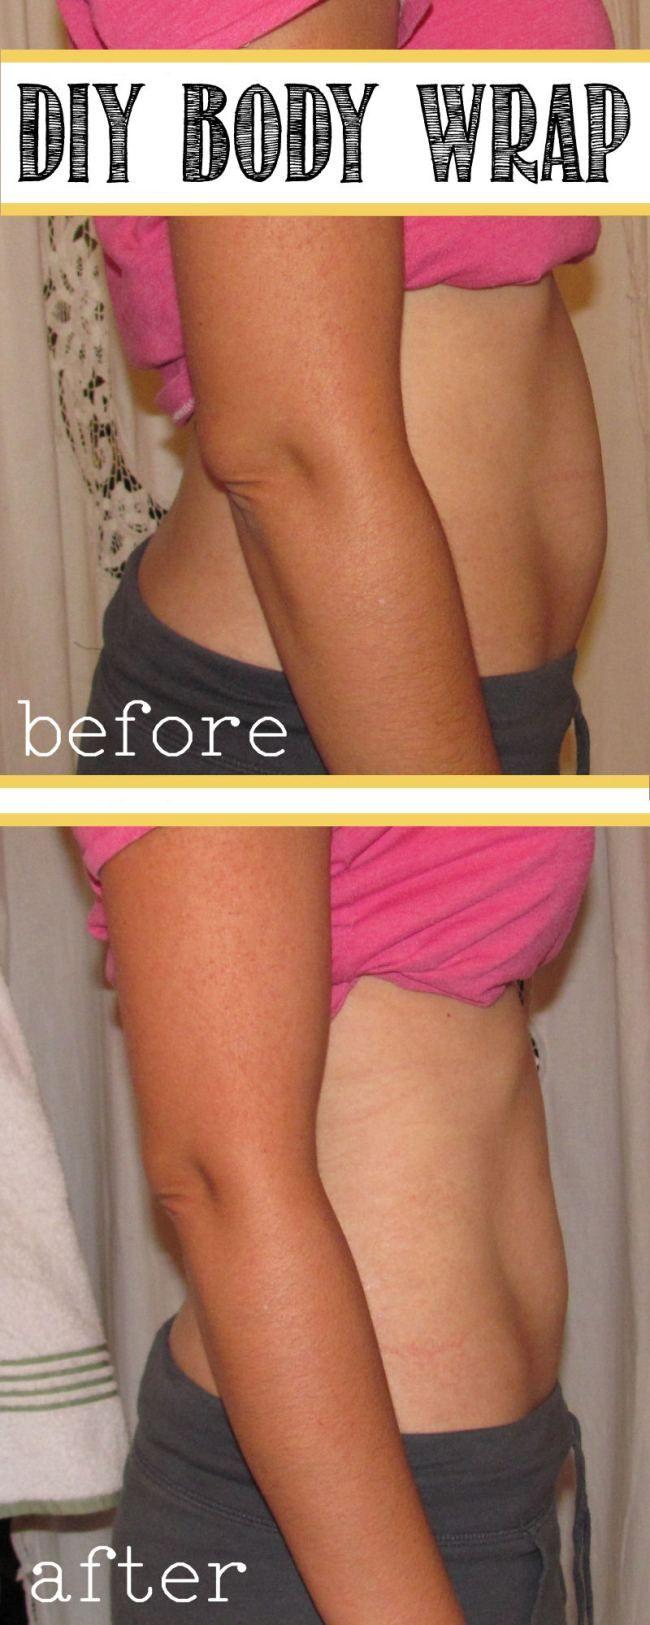 Wedding - DIY Body Wrap -lose Up To 1 Inch Over Night!